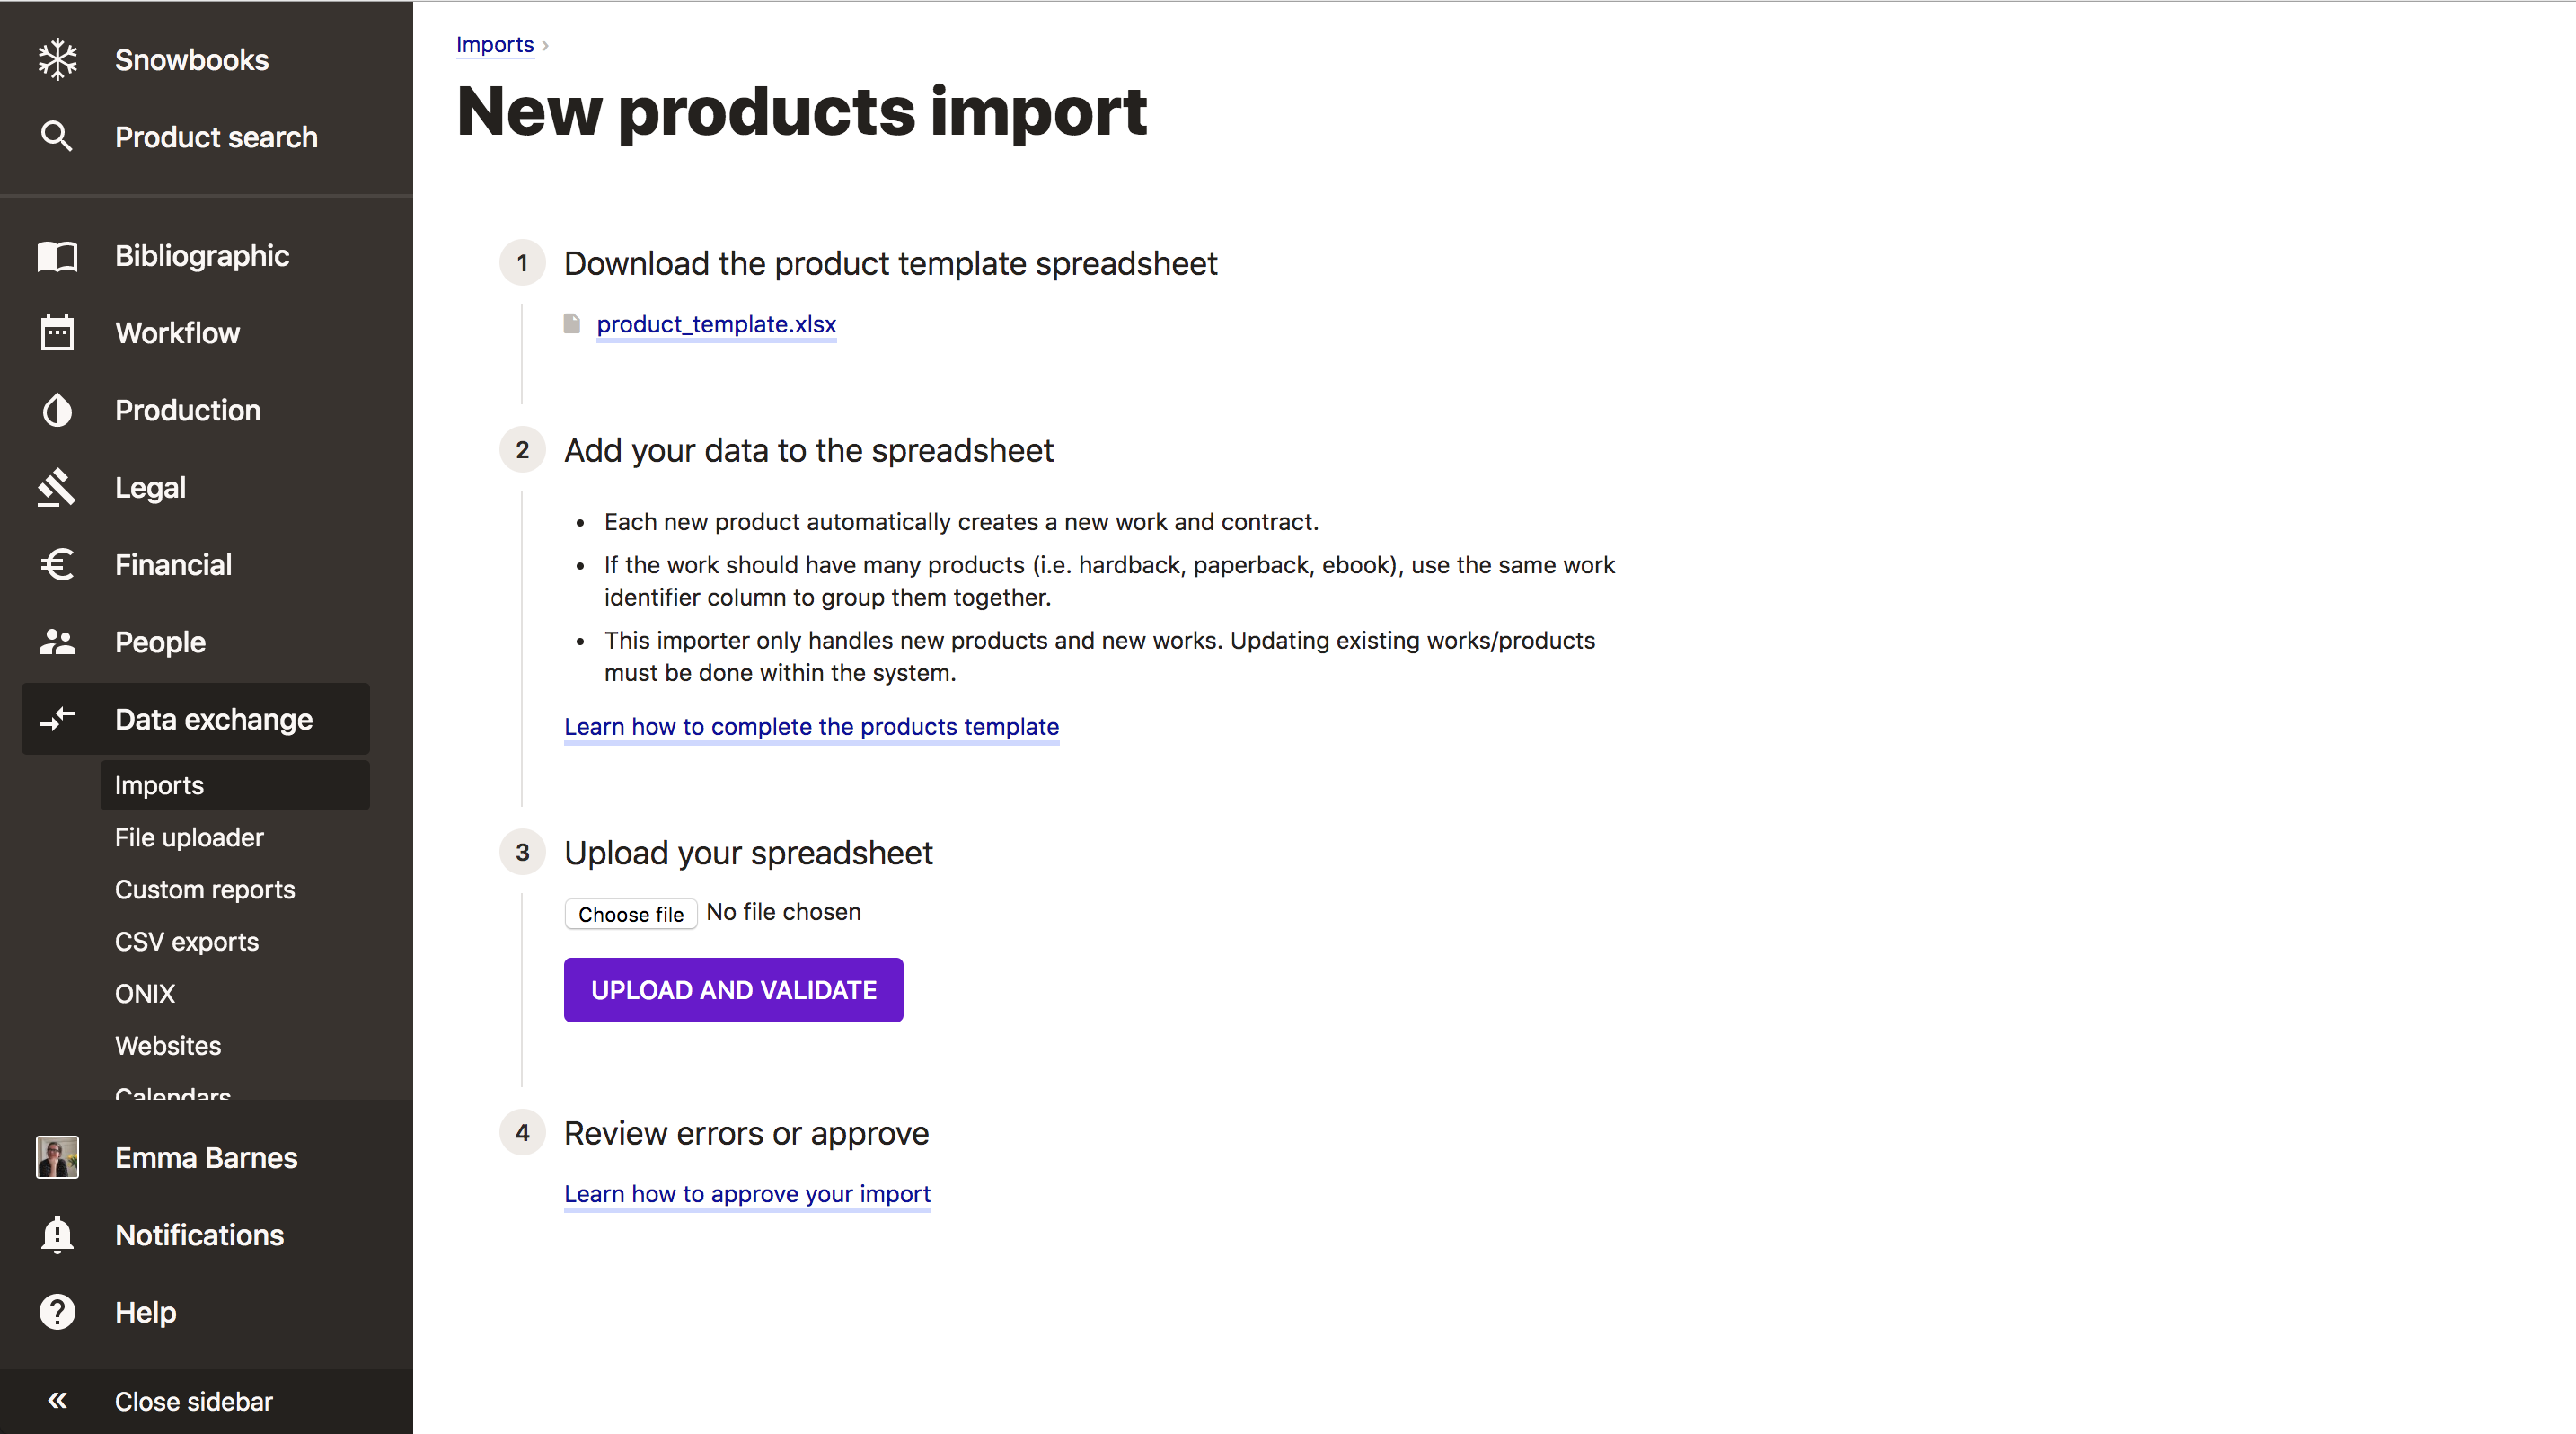 Screenshot of the imports page.